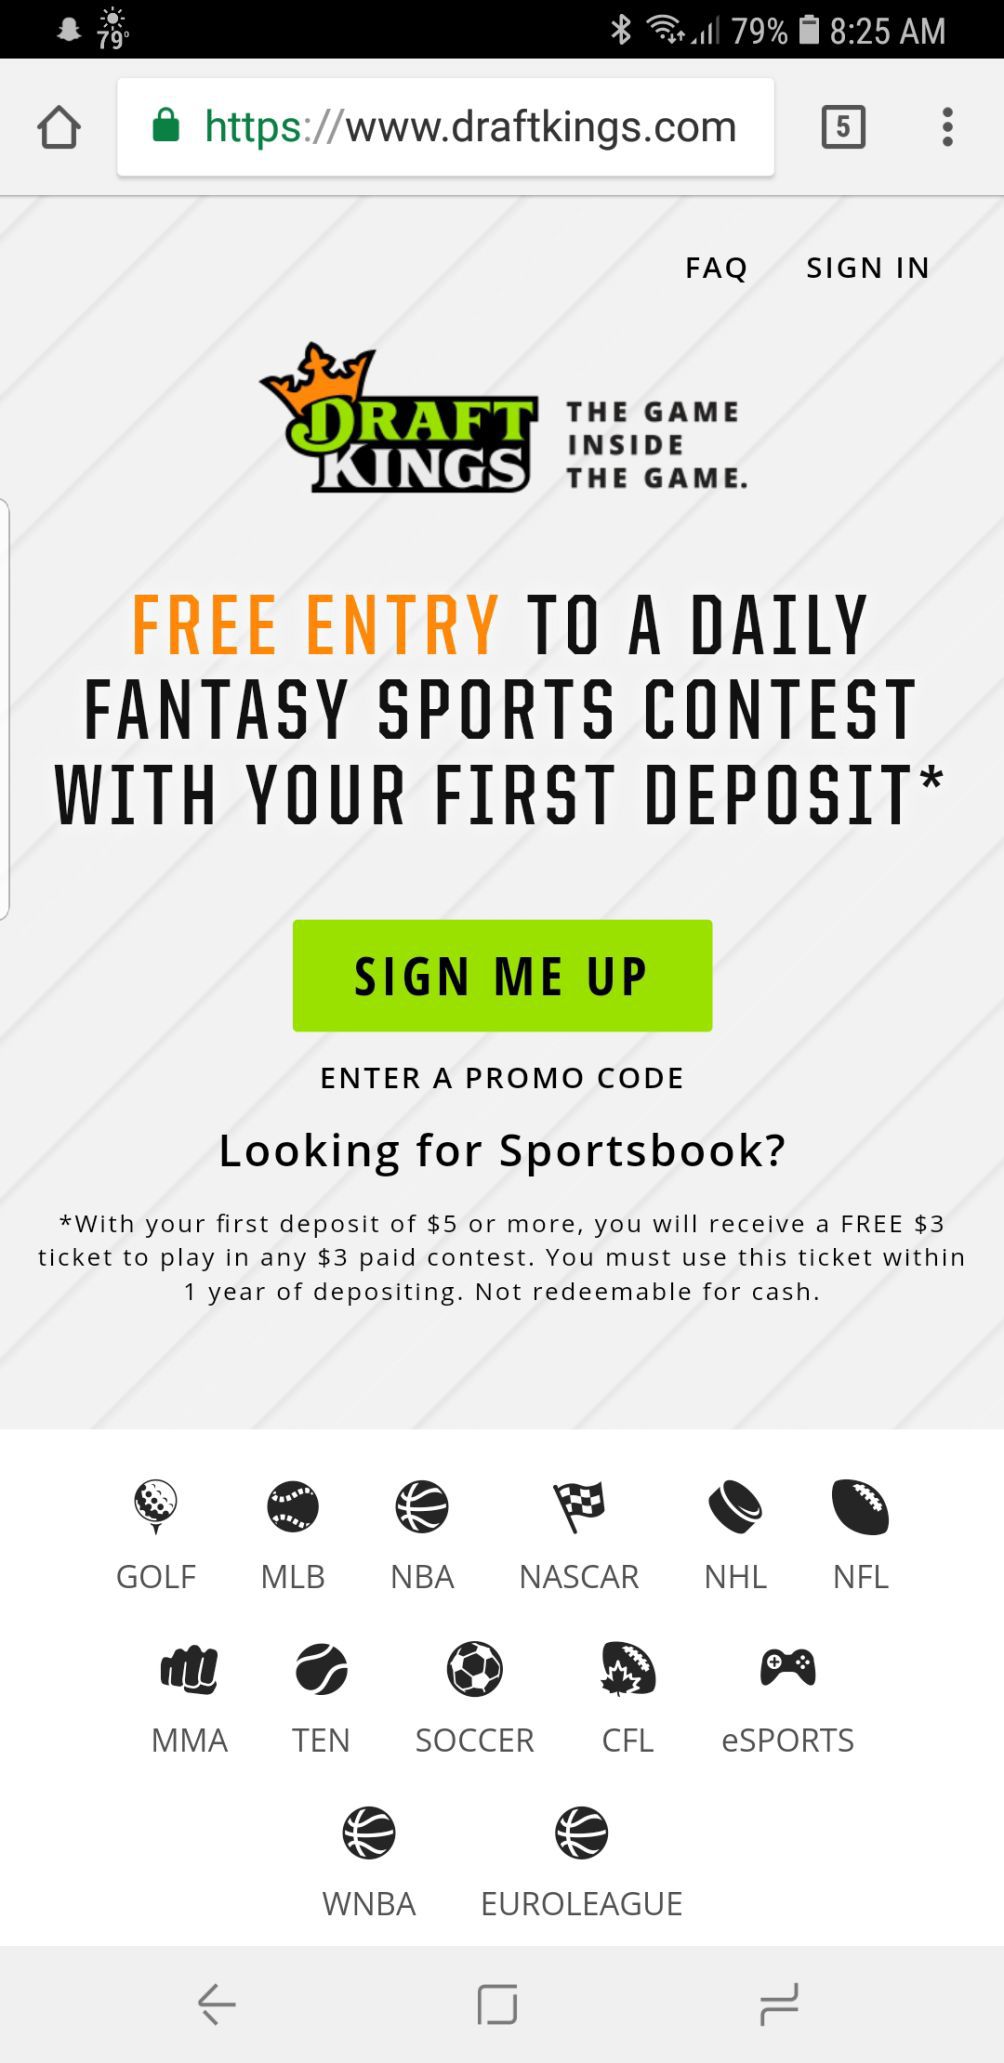 can you bet on sports on draftkings